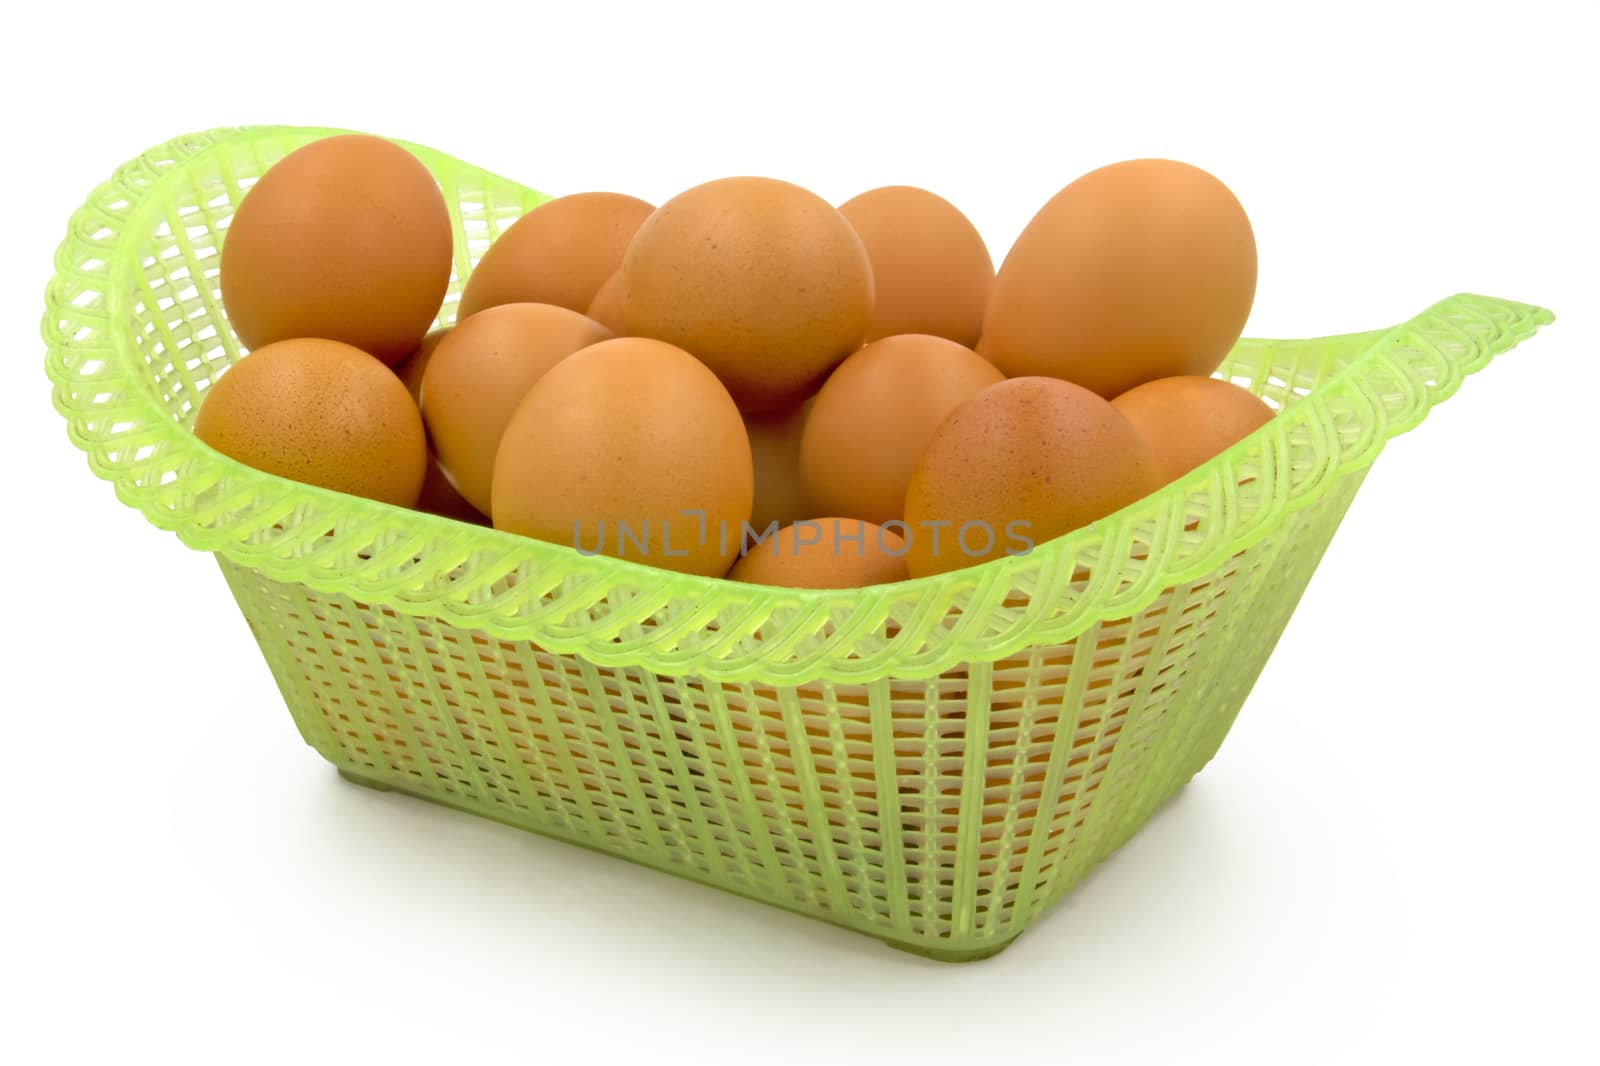 Eggs in basket isolated on white background by ronnarong